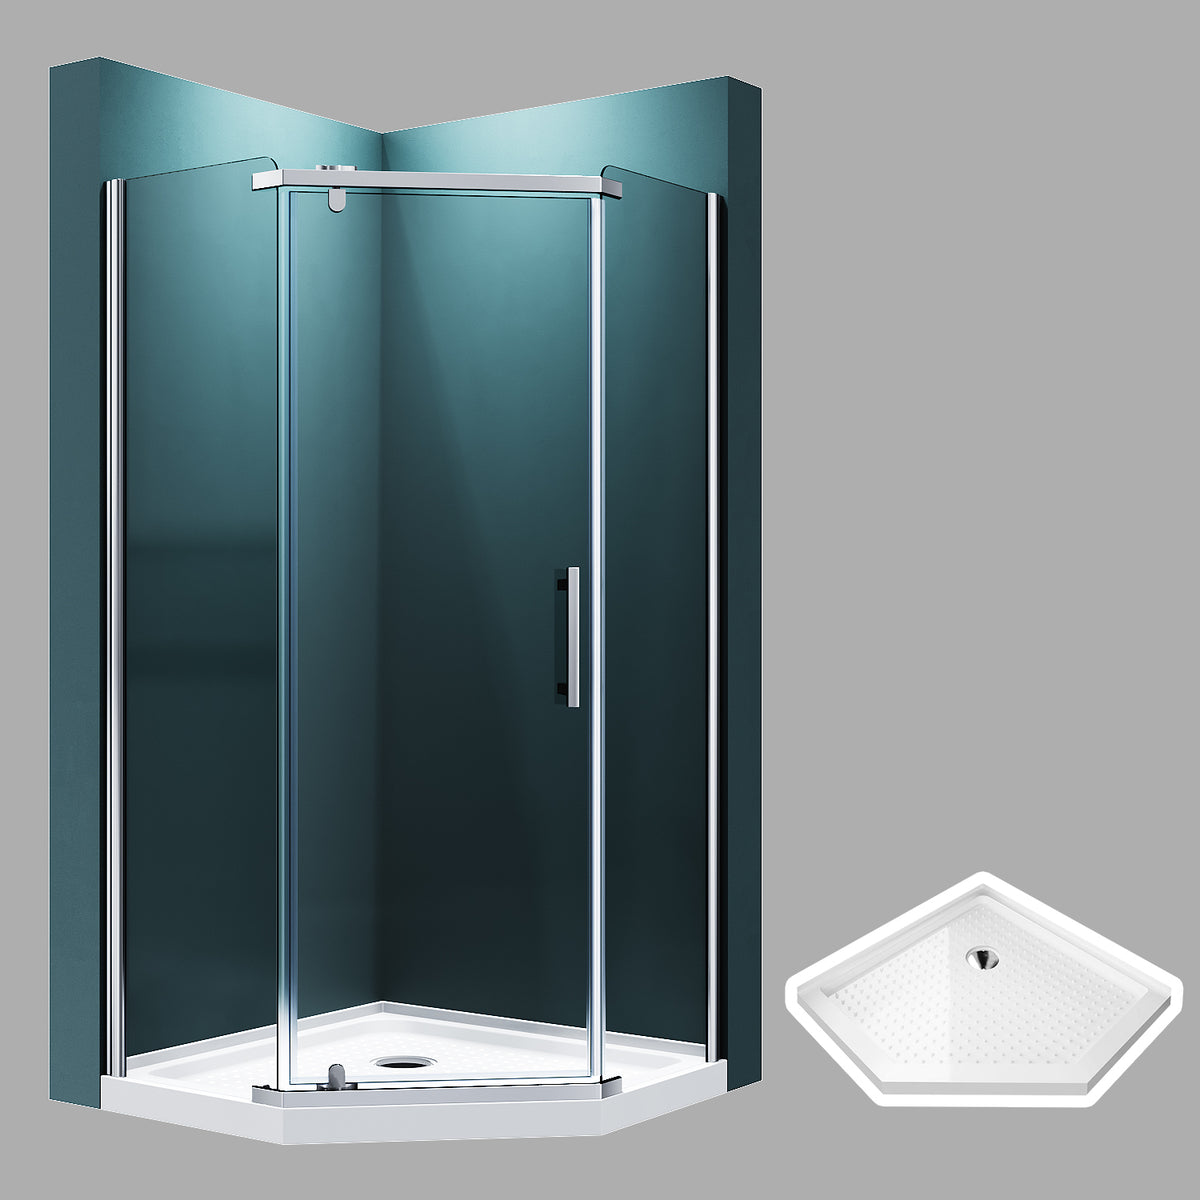 SUNNY SHOWER 38 in. W x 38 in. D x 72 in. H Chrome Finish Pivot Enclosures With Pivot Door And White Diamond Bases - SUNNY SHOWER